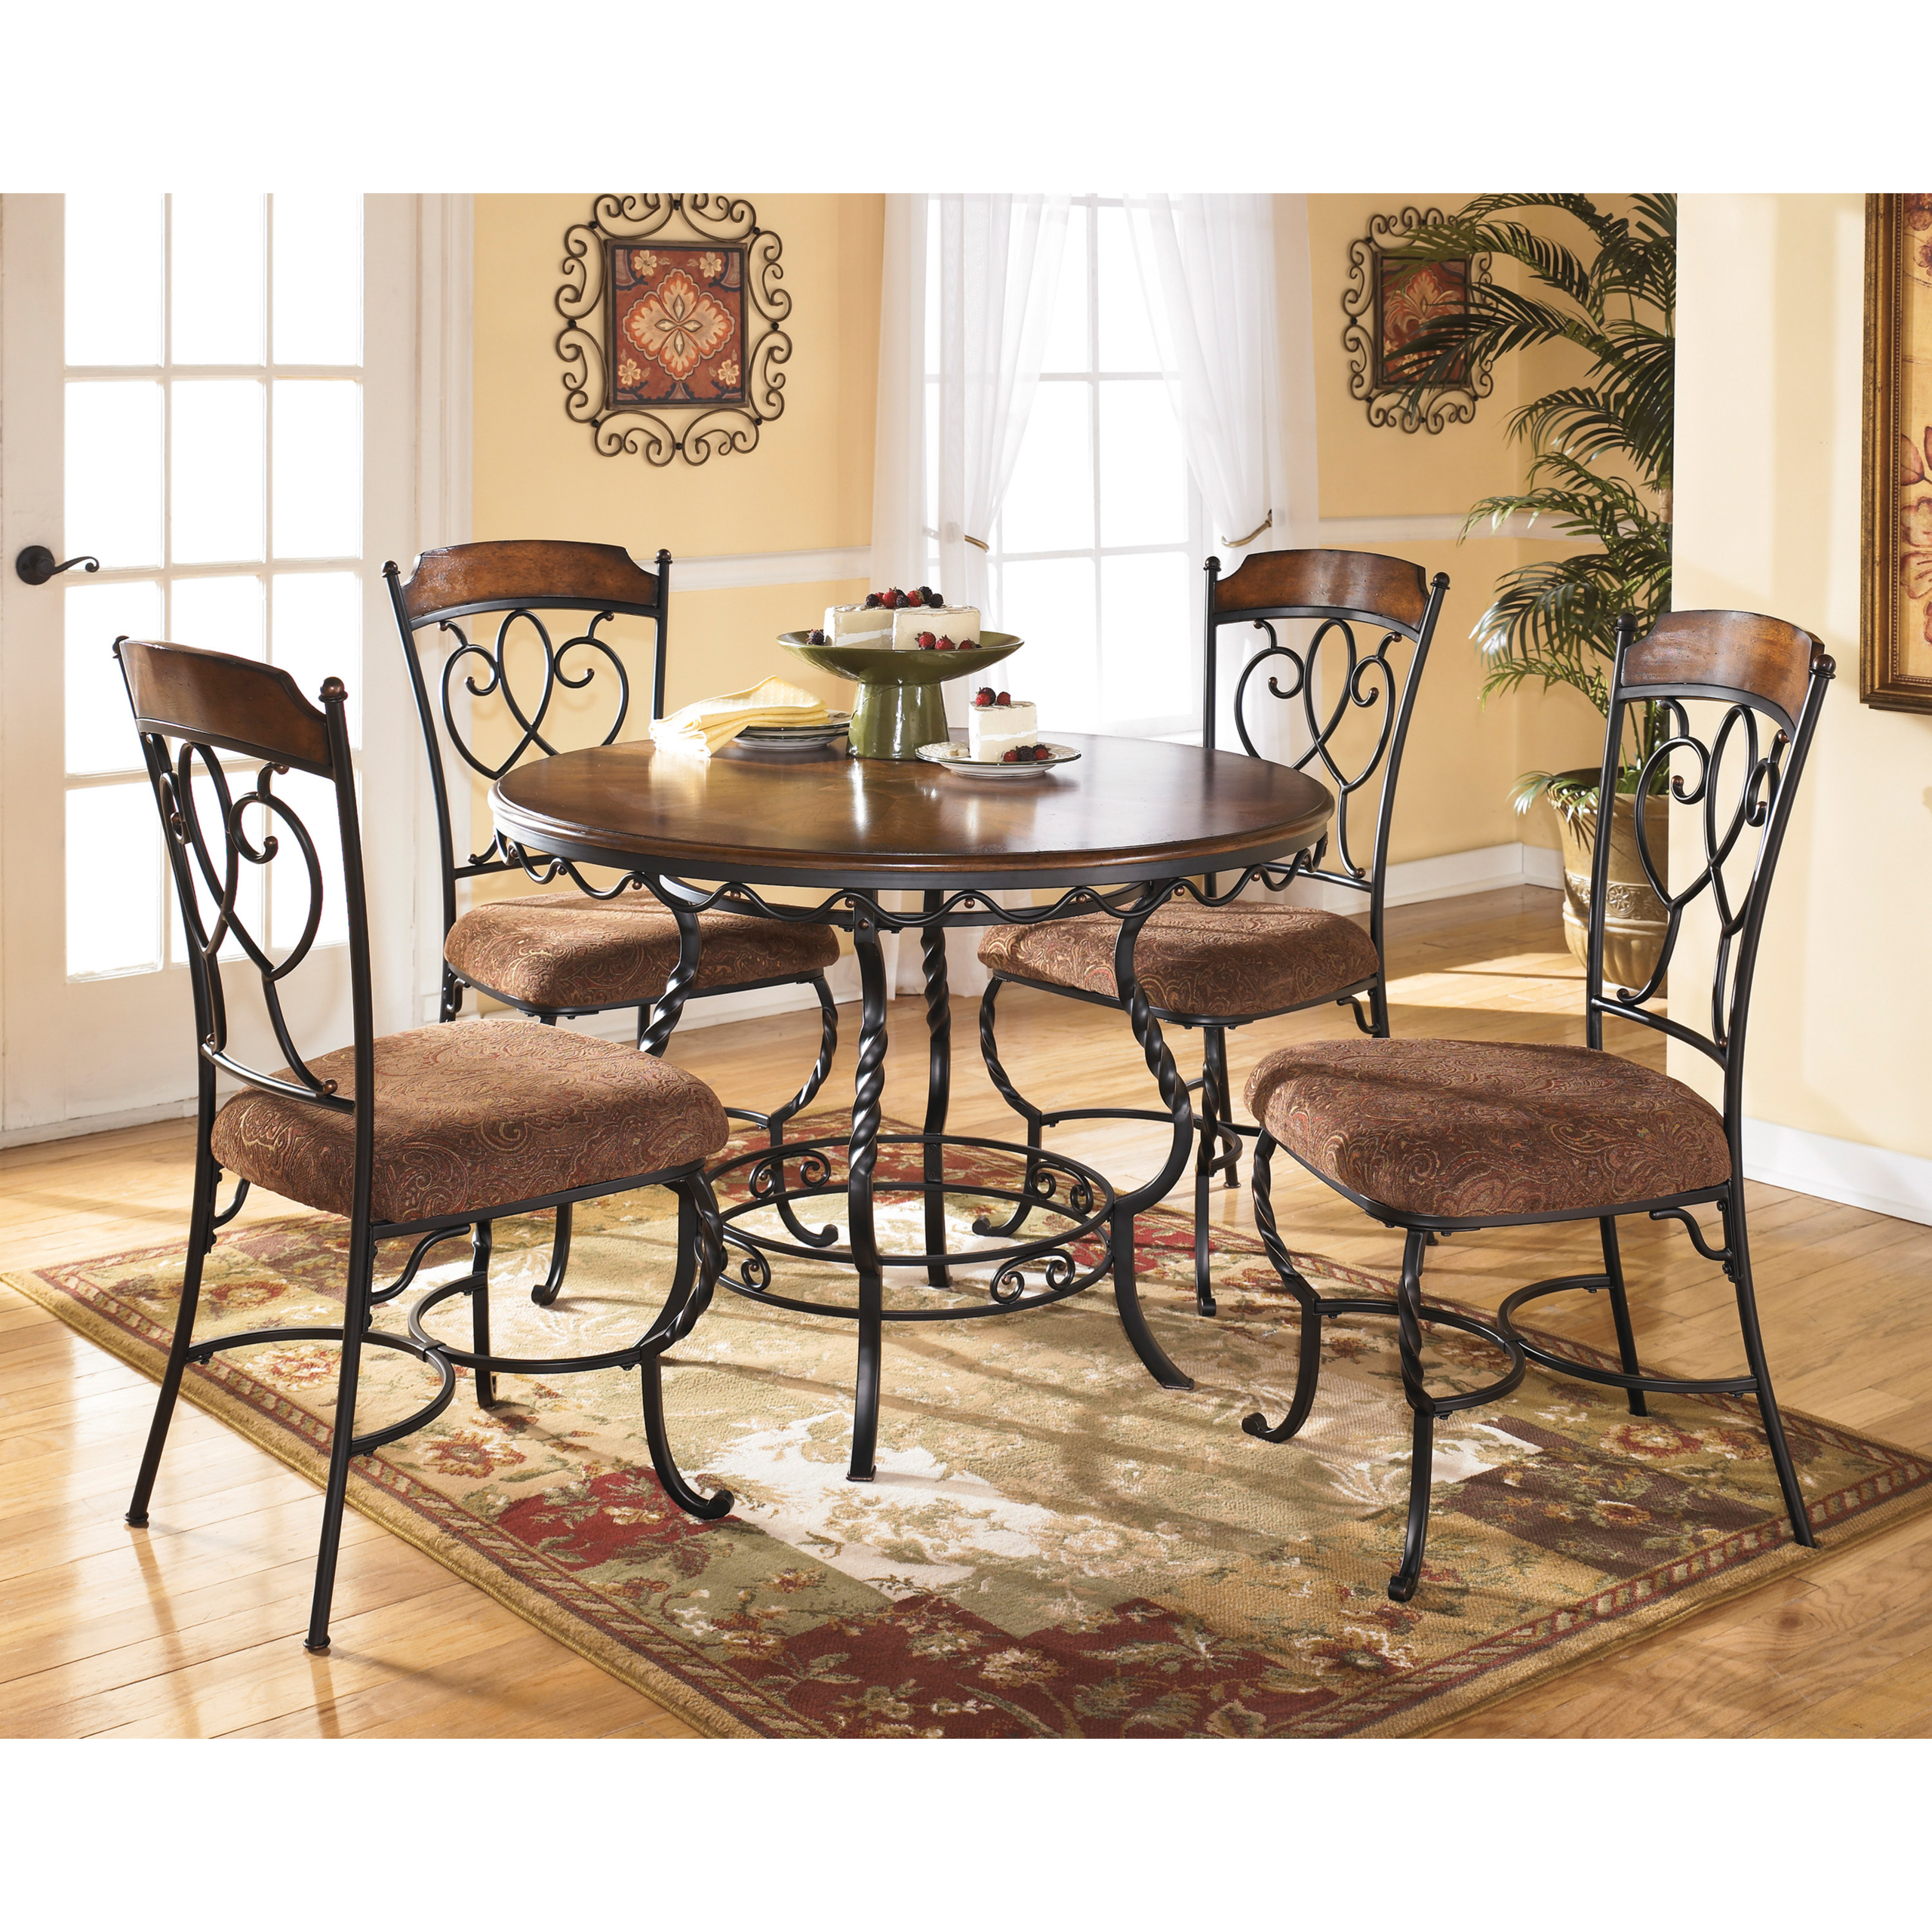 Nola round table dinette set clearance